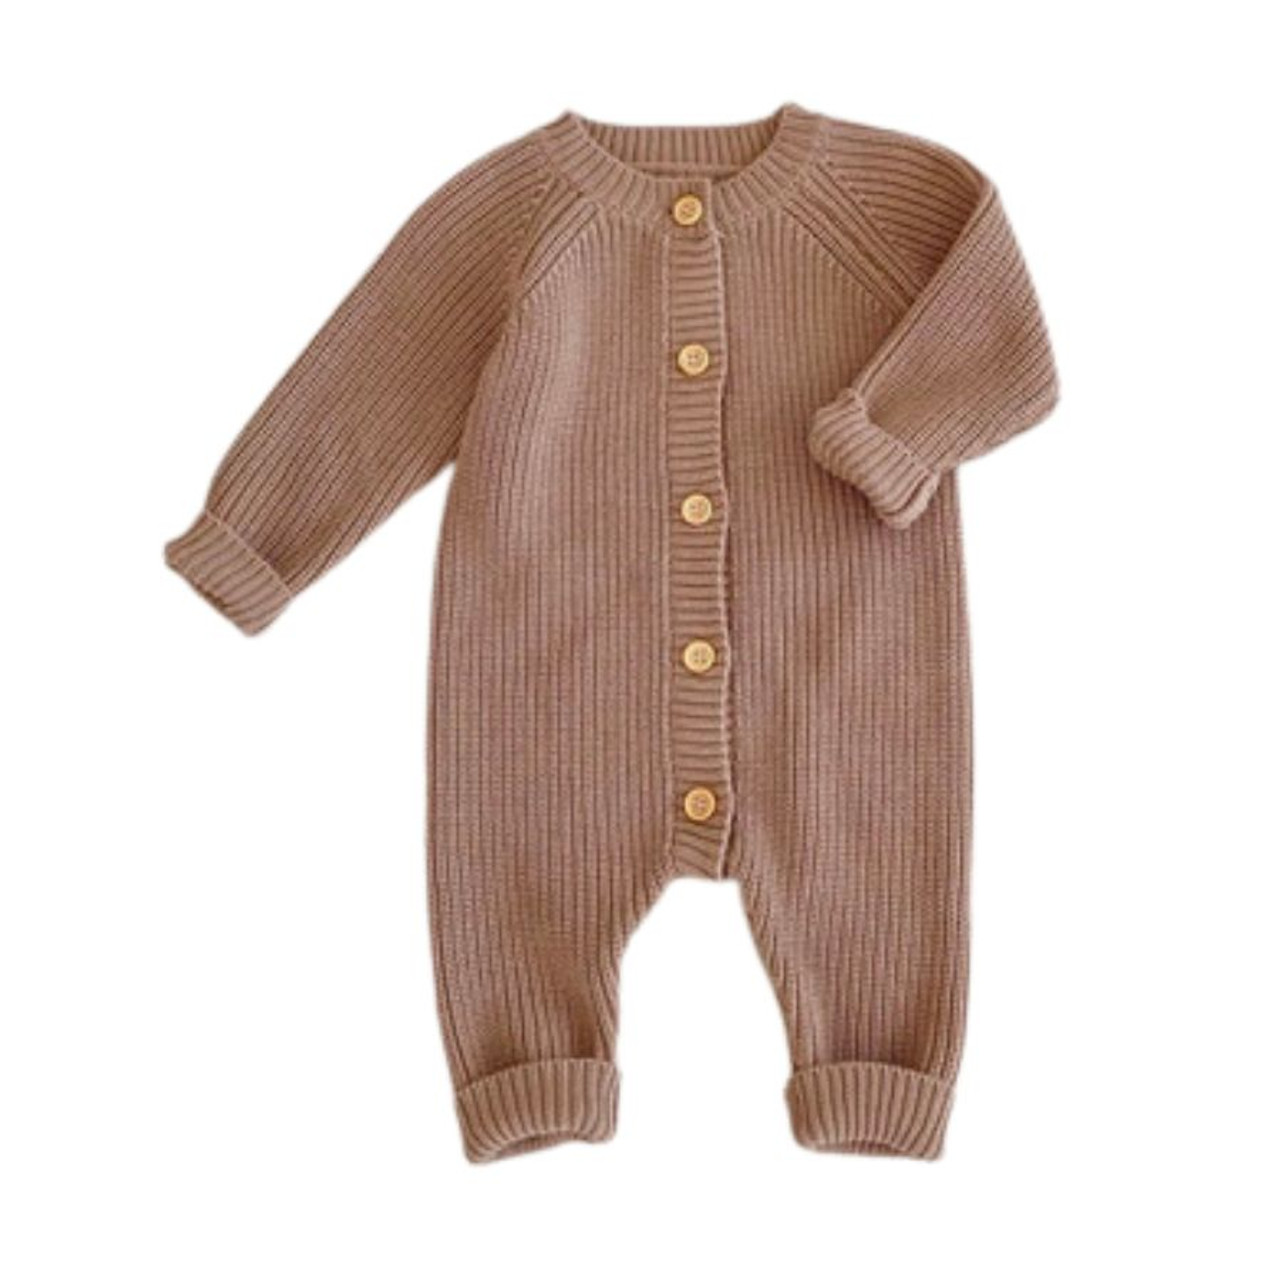 Organic Knit Baby Suit